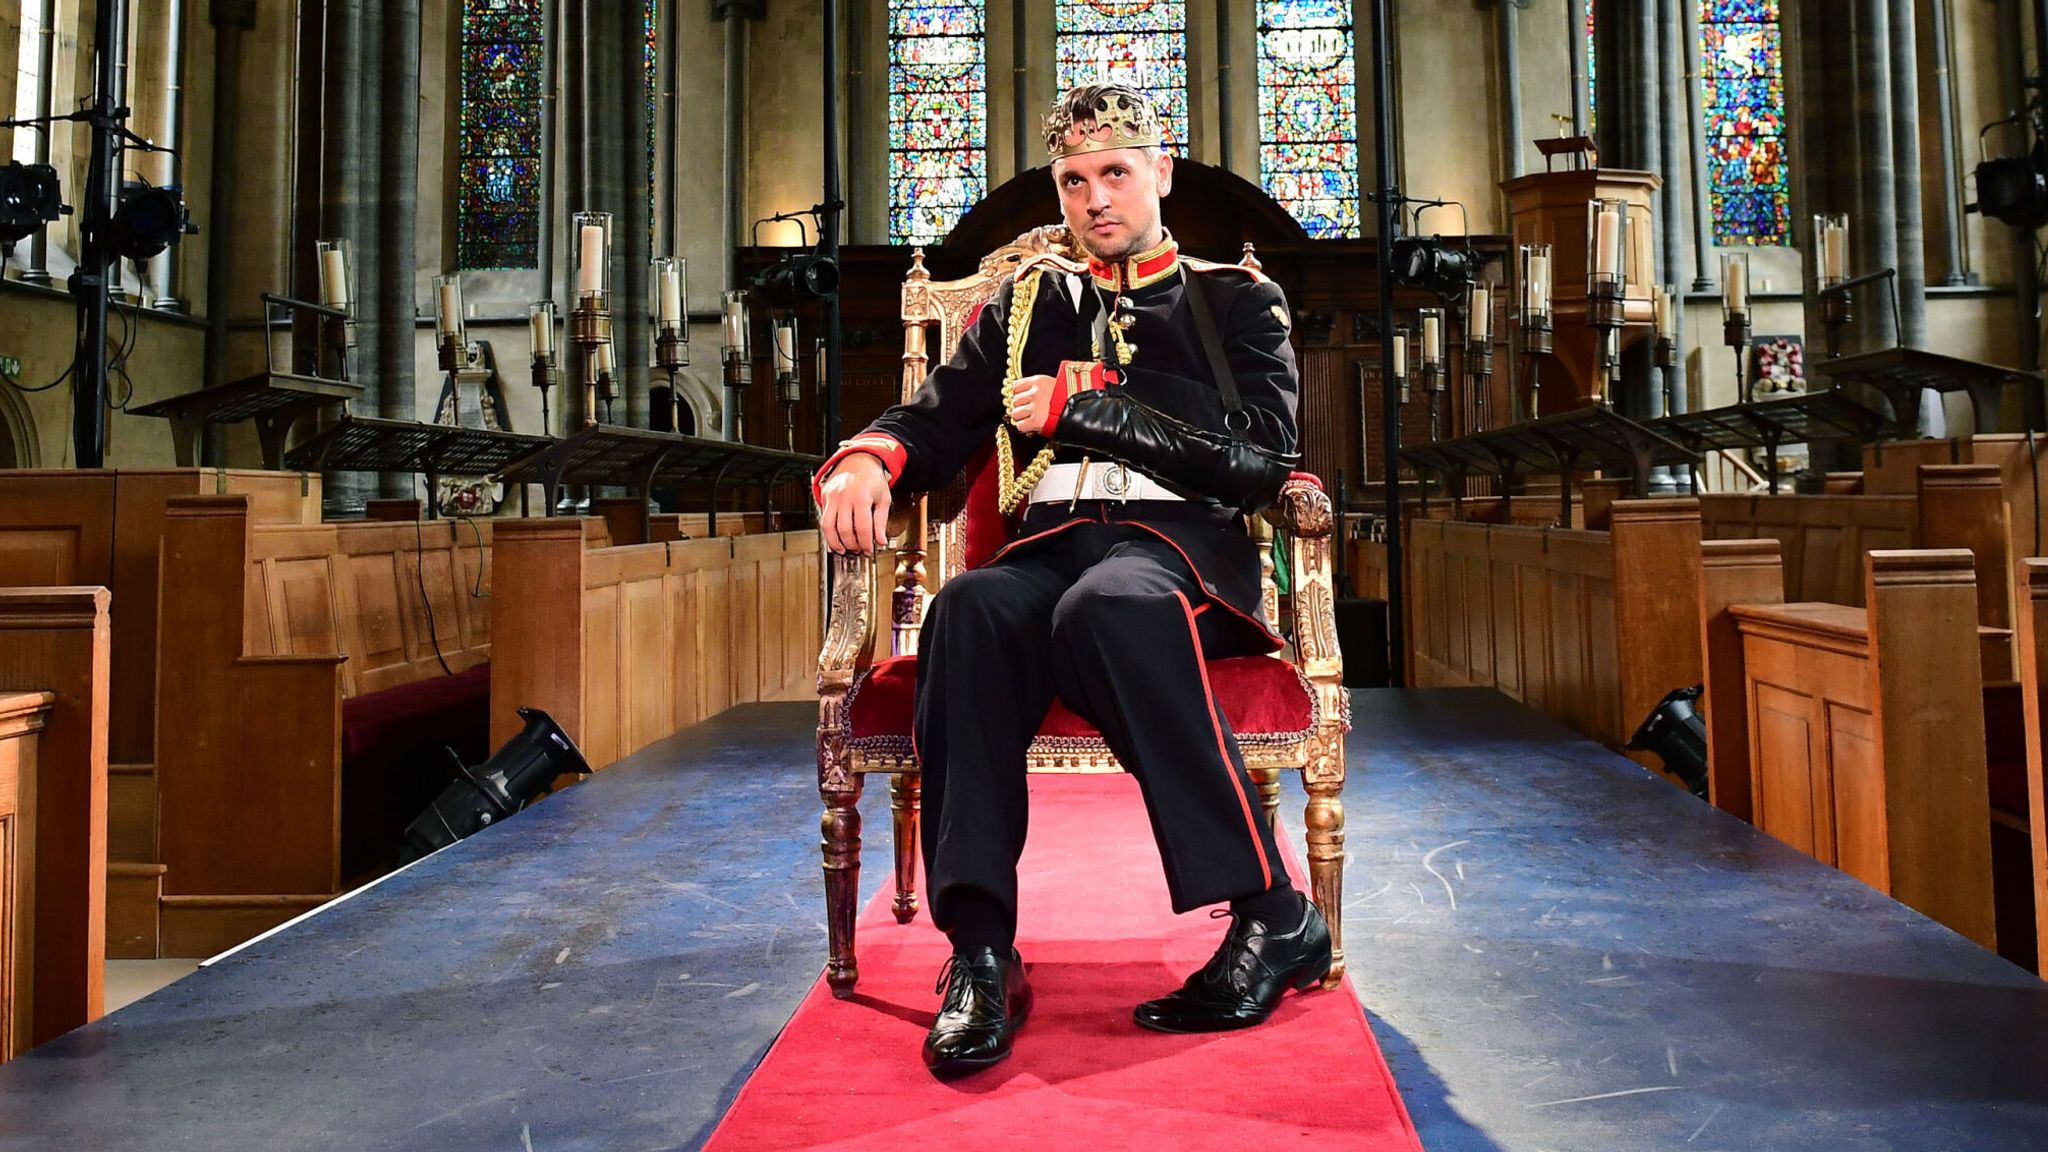 Toby Manley in the lead role of the new production of Shakespeare&#39;s Richard III by Theatre company Antic Disposition at Temple Church, London.